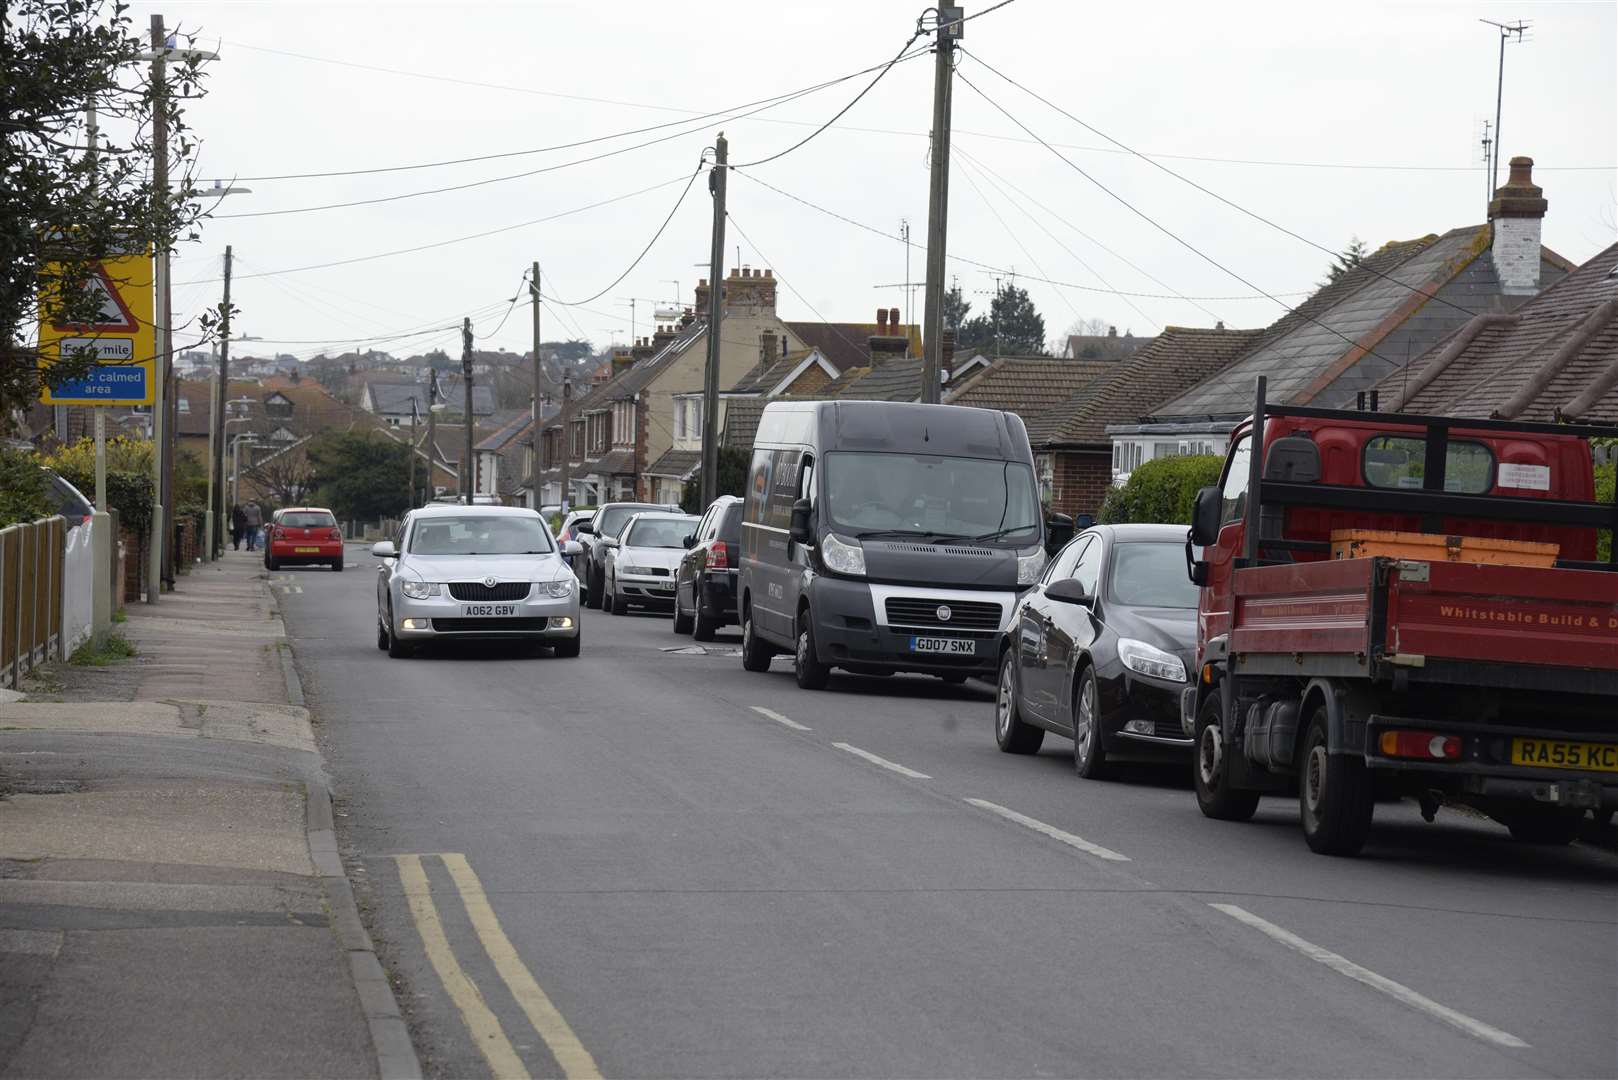 Grimshill Road, Whitstable, is one of the roads where a new 20mph limit could be introduced